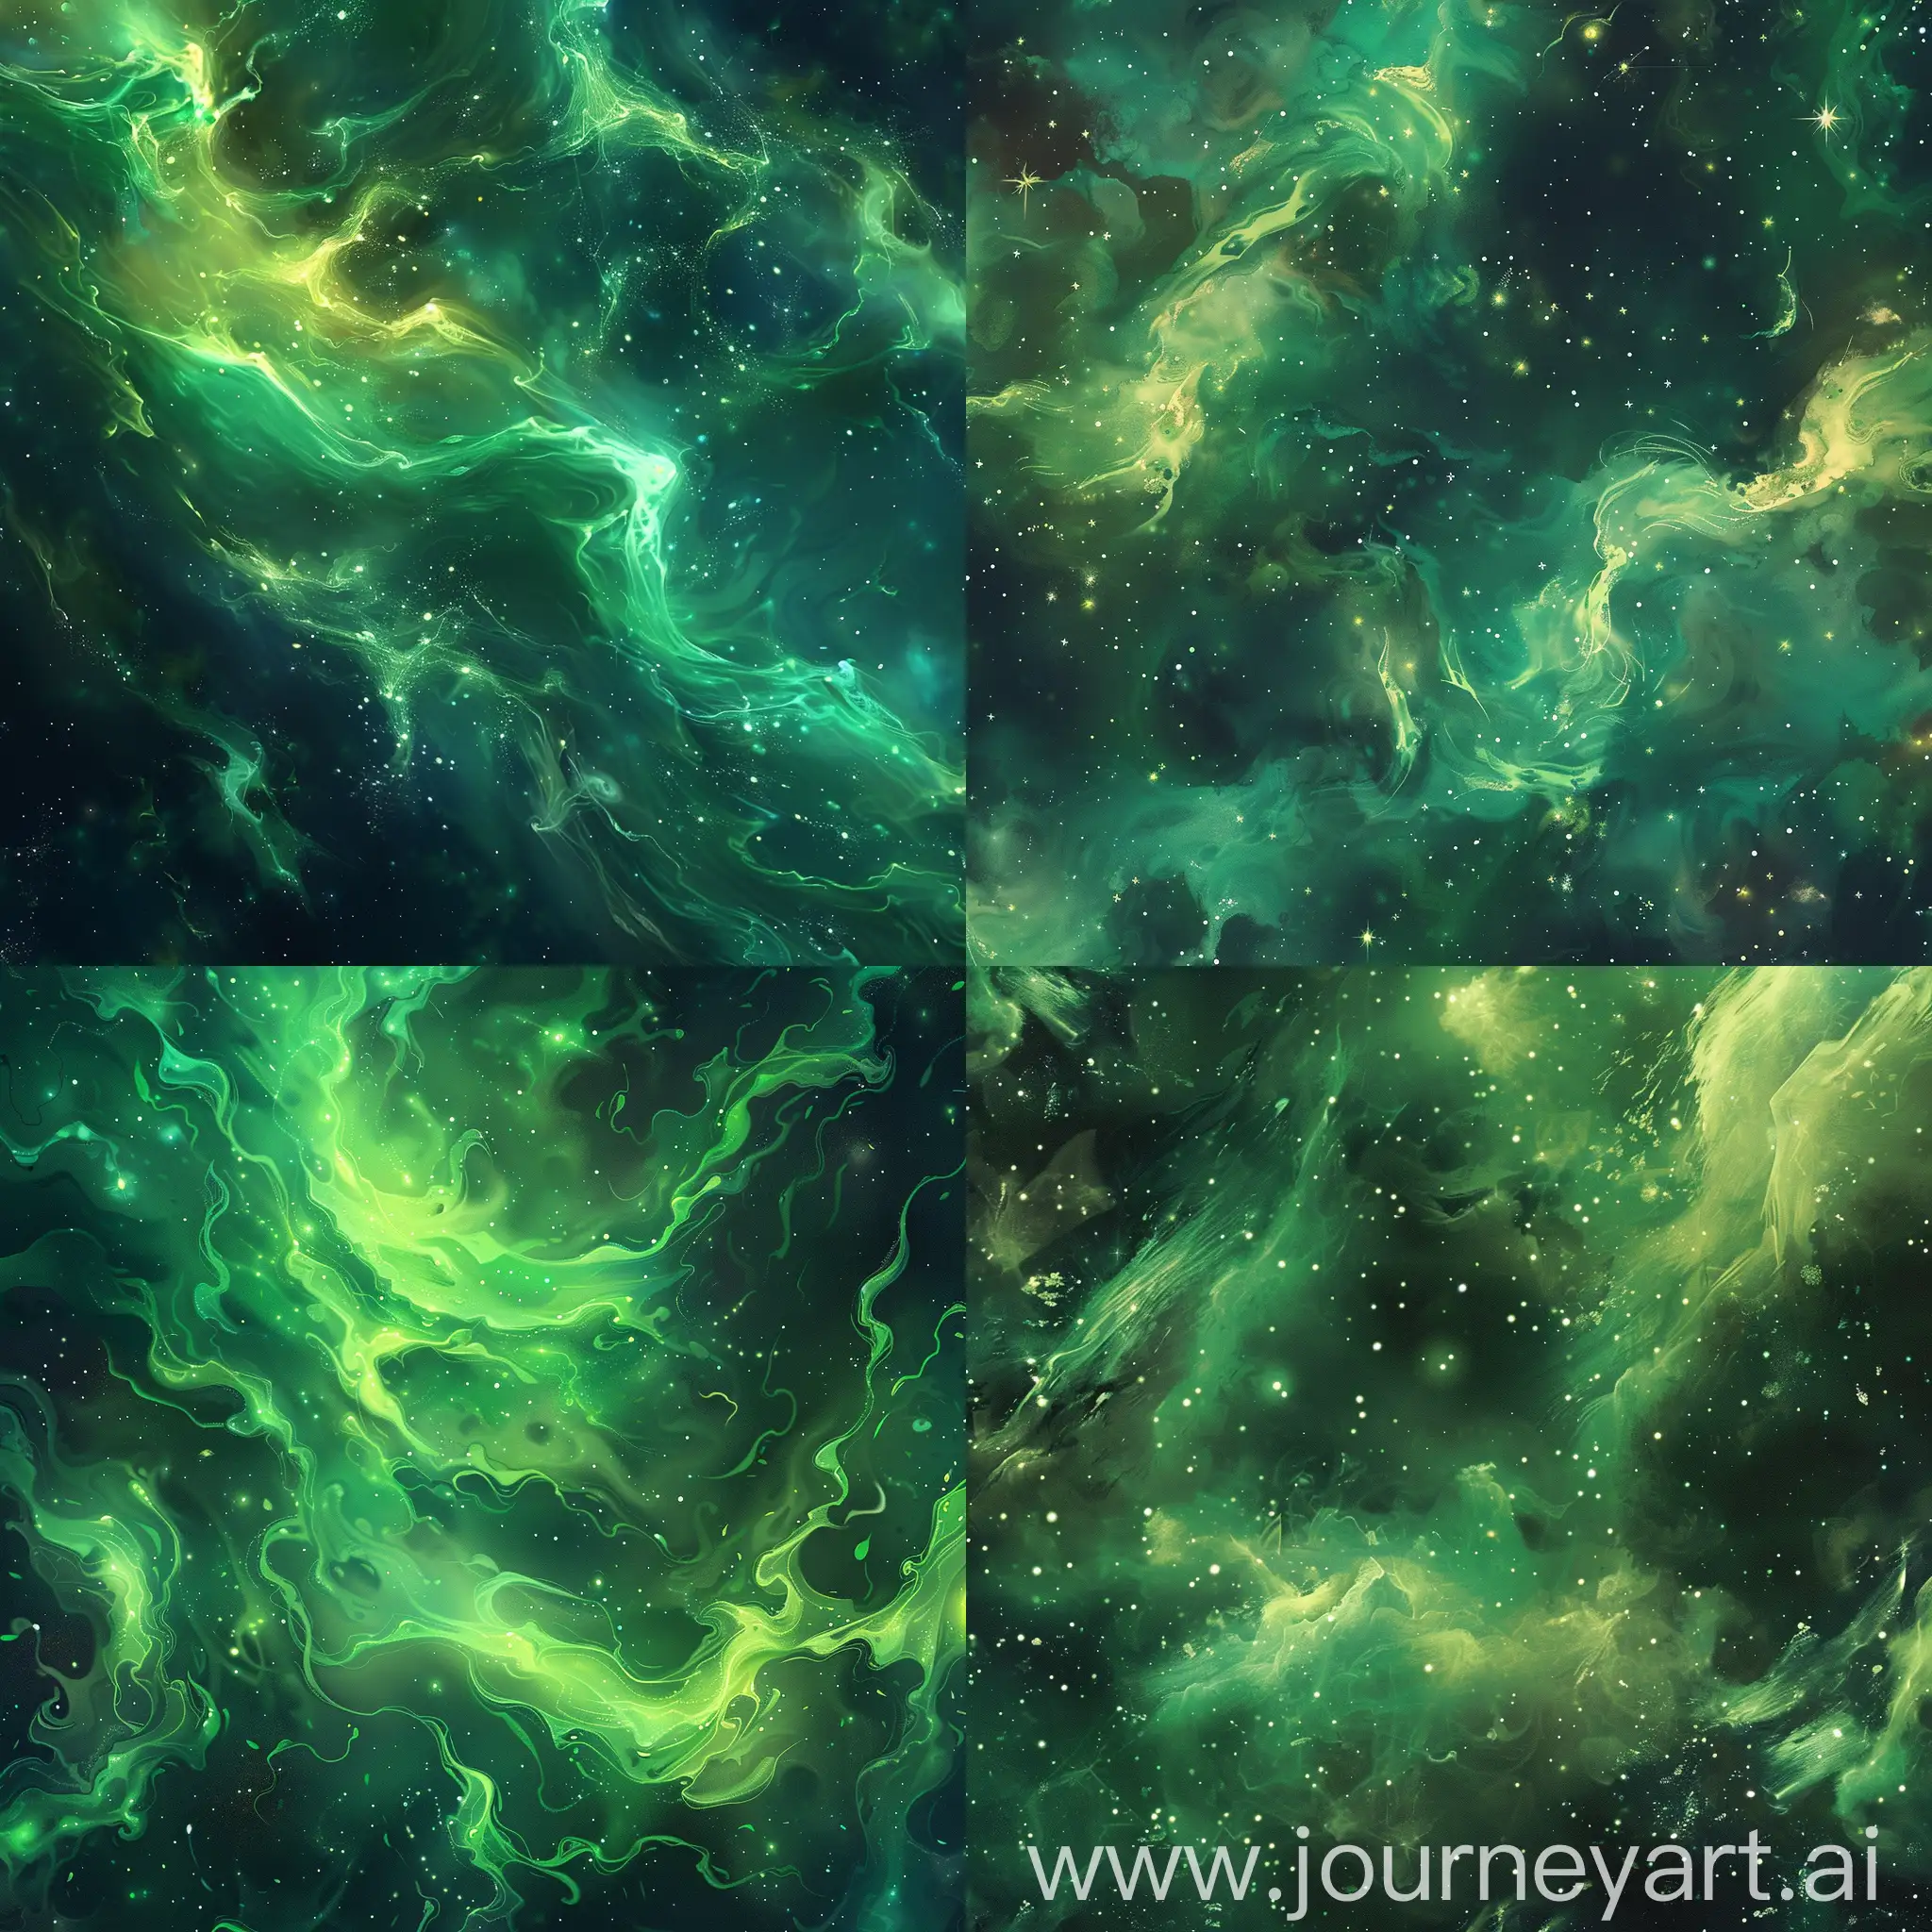 Seamless-Fantasy-Green-Space-with-Nebula-in-Hearthstone-Style